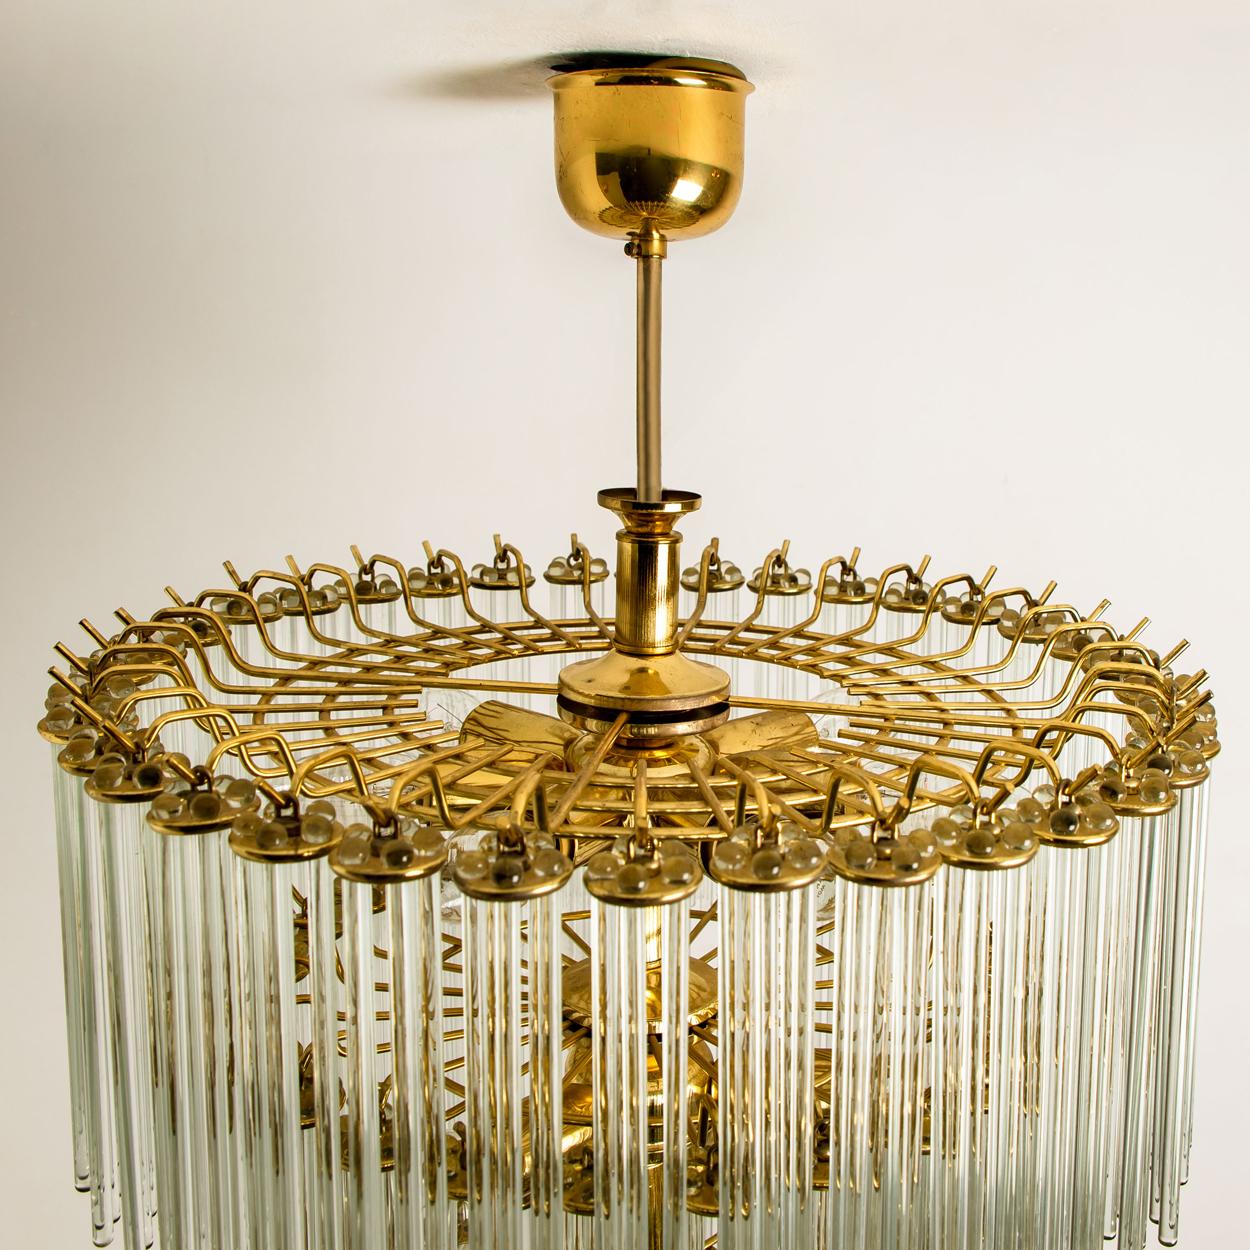 A Italian Mid-Century Modern glass rod and brass Gaetano Sciolari flush mount for Lightolier, circa 1960s-1970s. Illuminates beautifully.
With round form clusters of light catching optical quality glass rods) sitting on a brass plated steel back